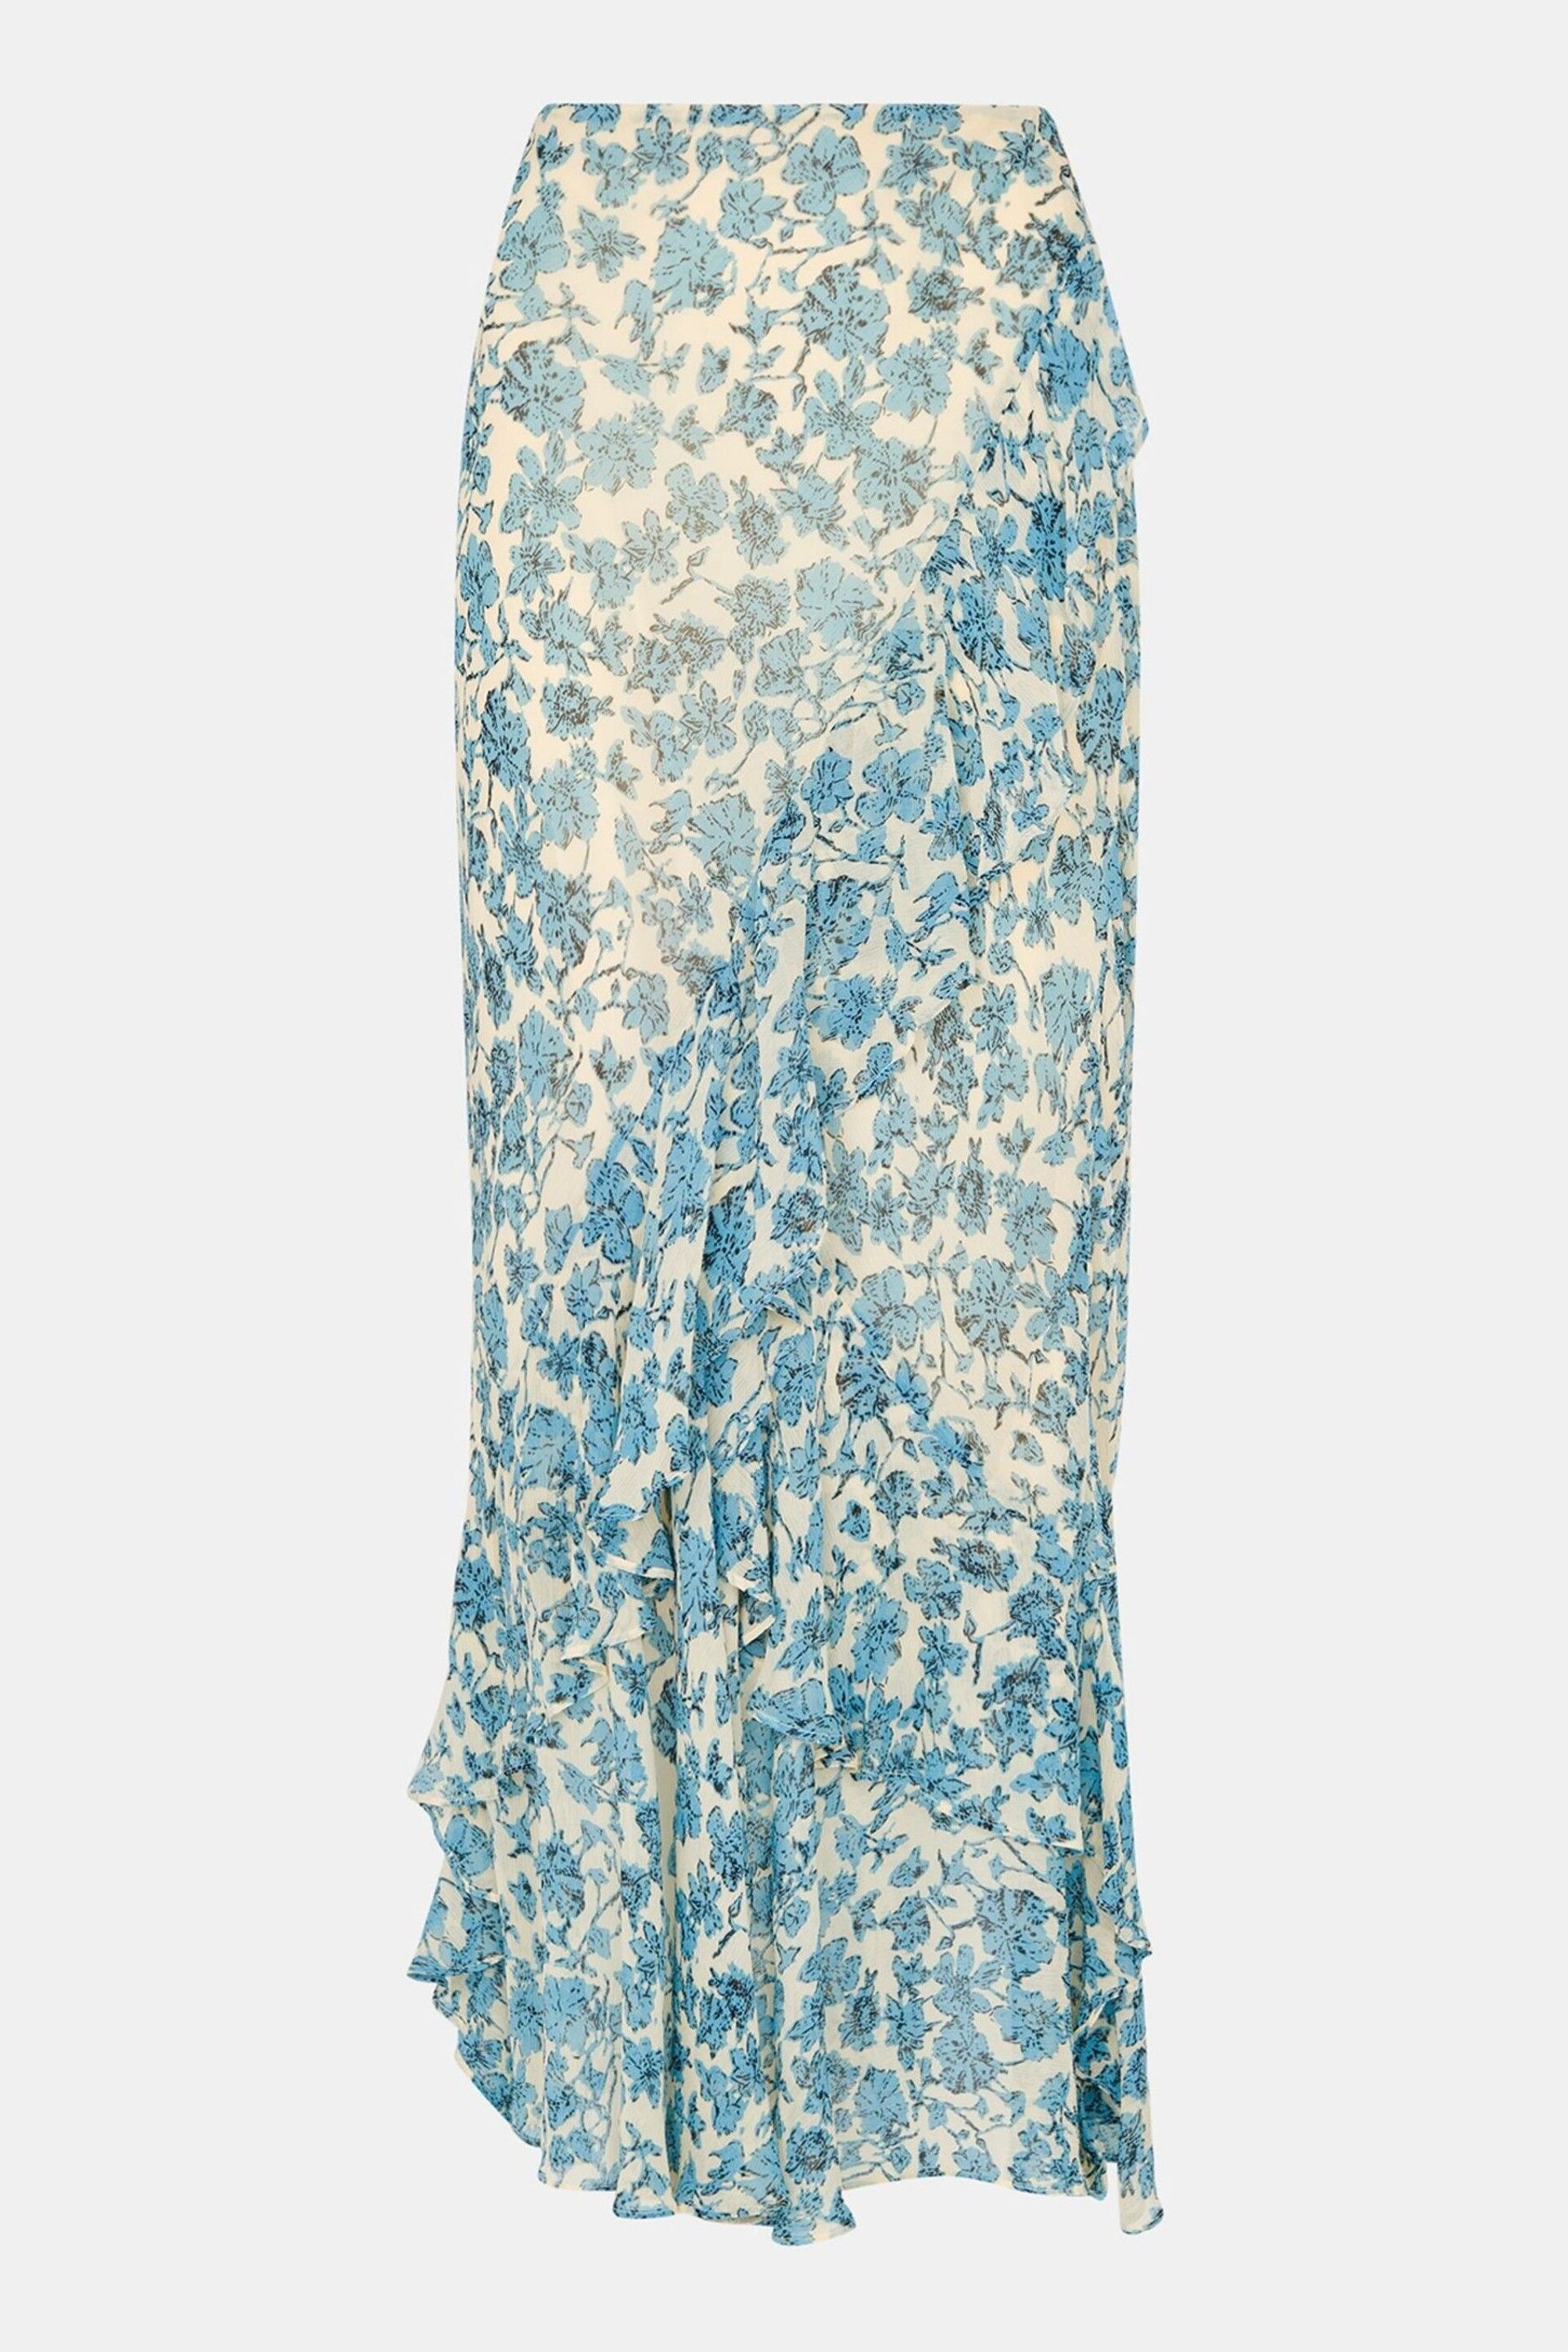 Whistles Blue Shaded Floral Midi Skirt - Image 5 of 5